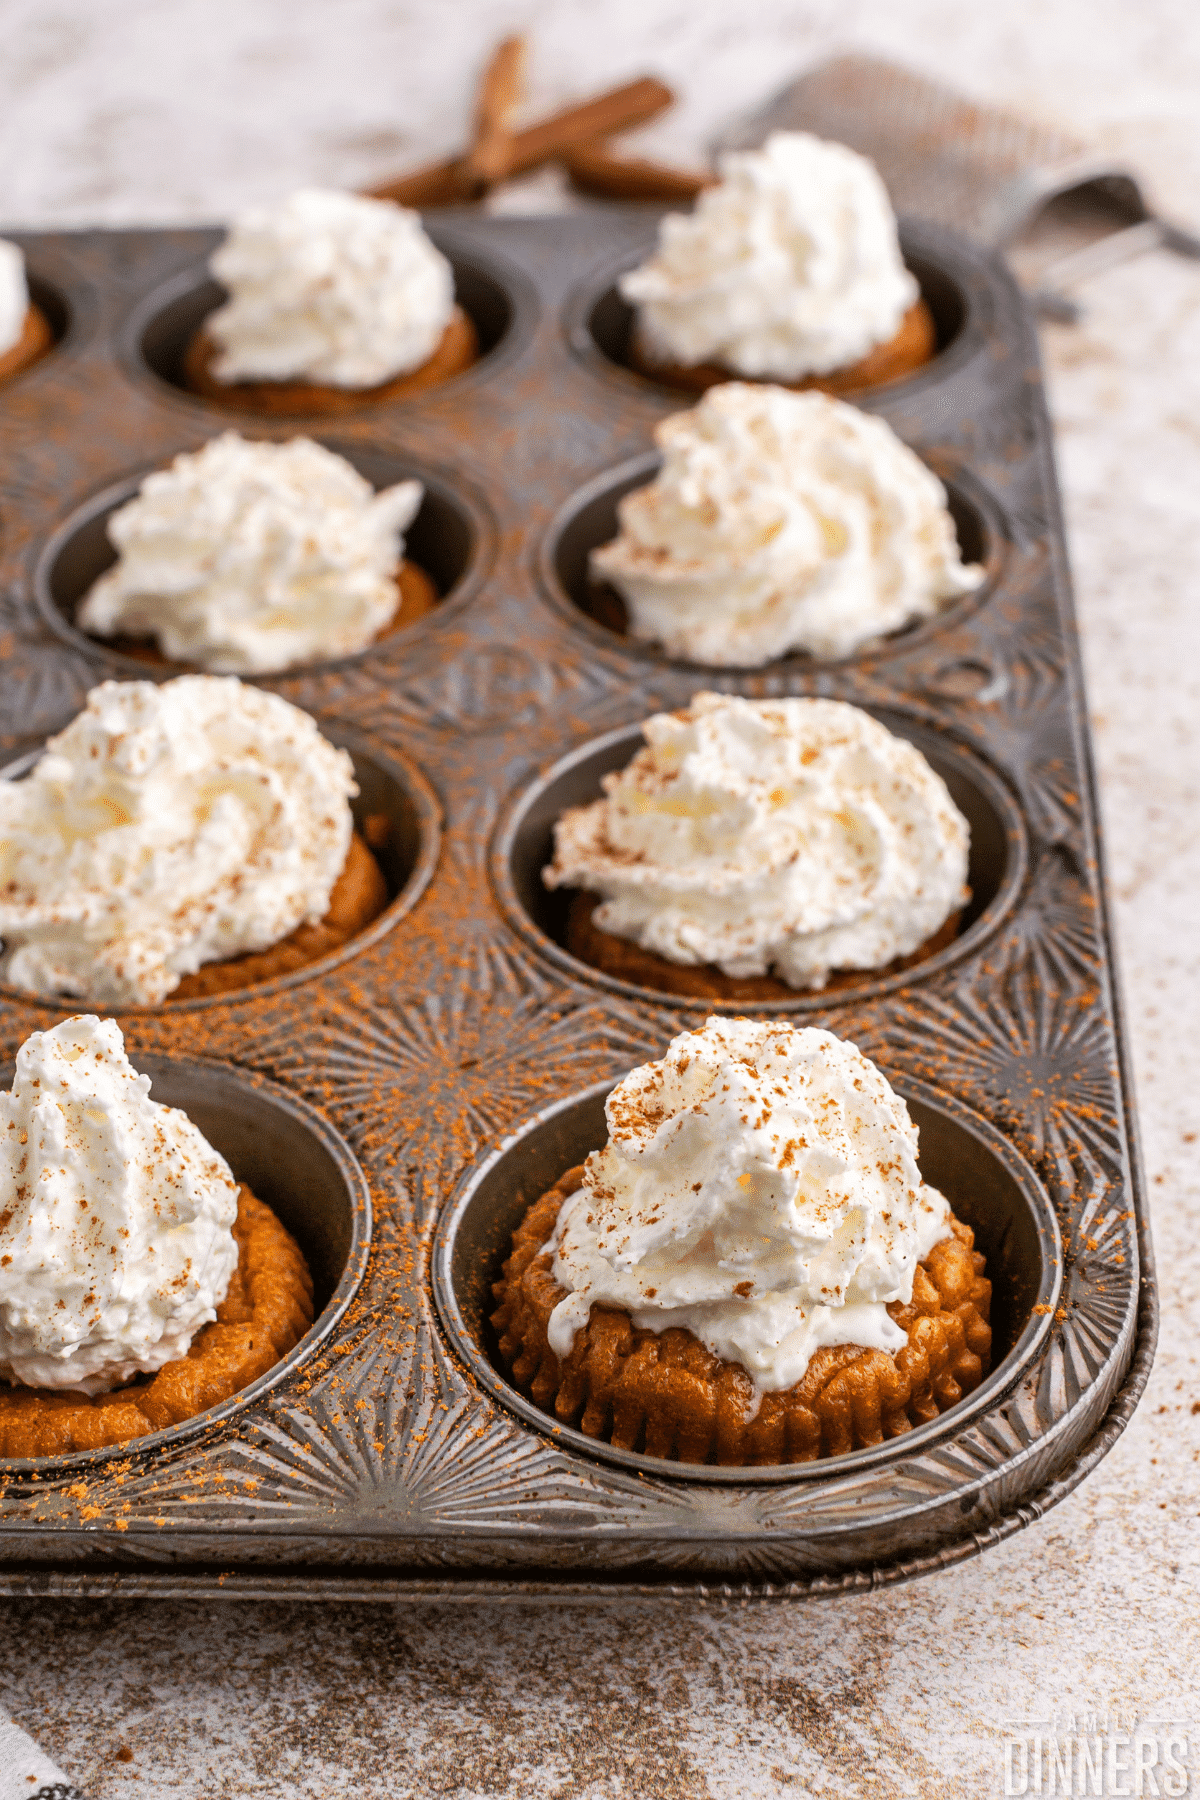 8 mini pumpkin pie cupcake in beautiful decorative cupcake tin. Each little pumpkin pie cupcake is topped with whipped cream and spice.